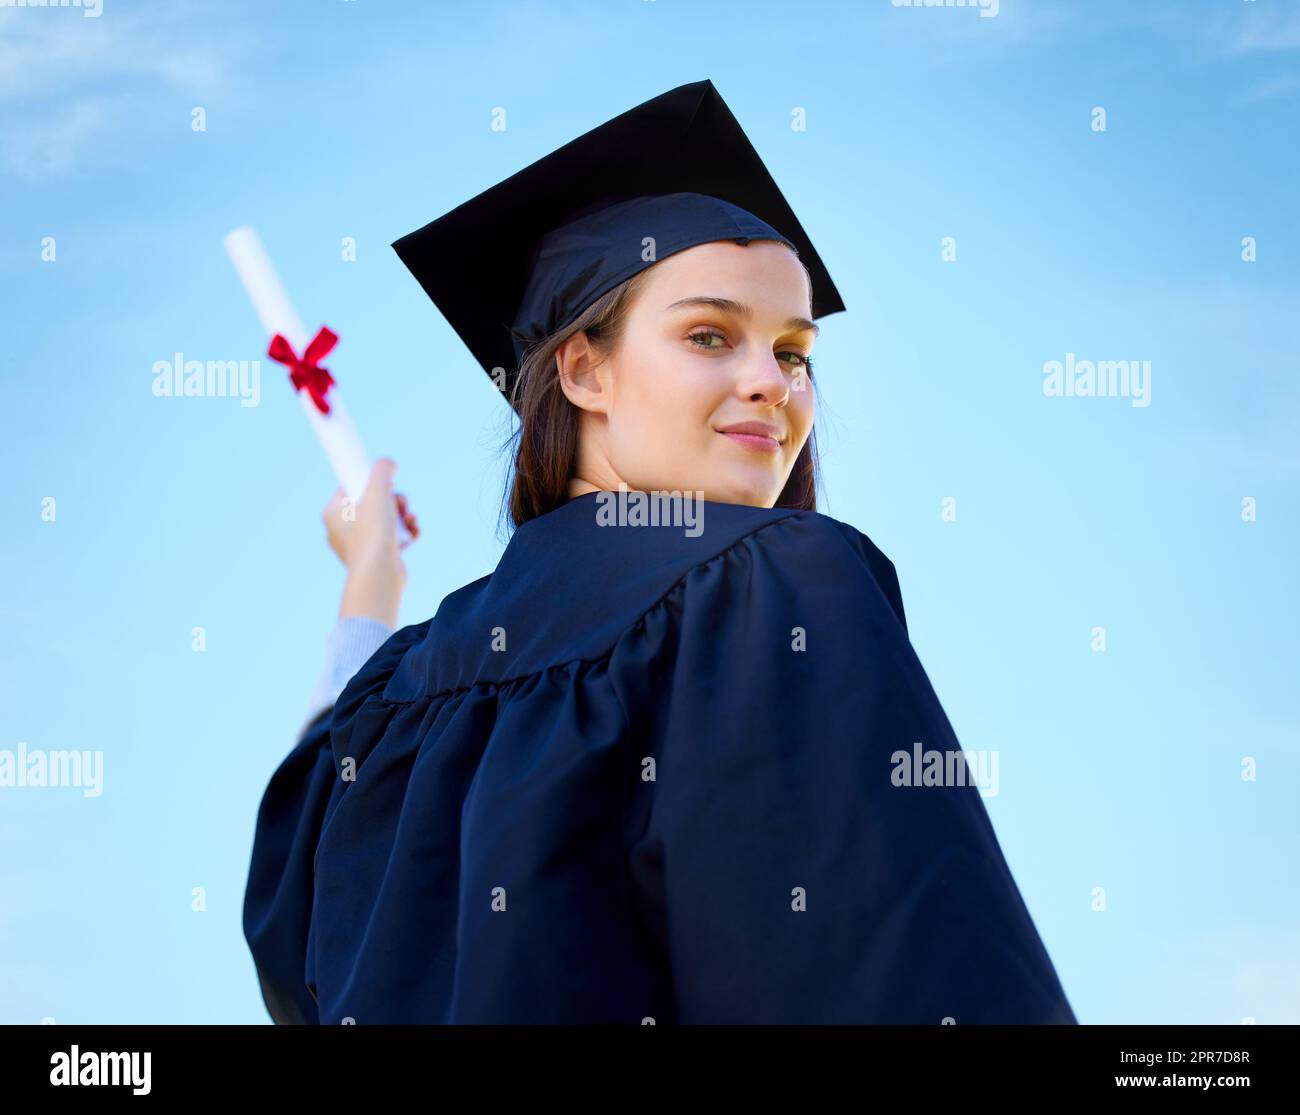 All my efforts paid off in a big way. Portrait of a young woman cheering with her diploma on graduation day. Stock Photo